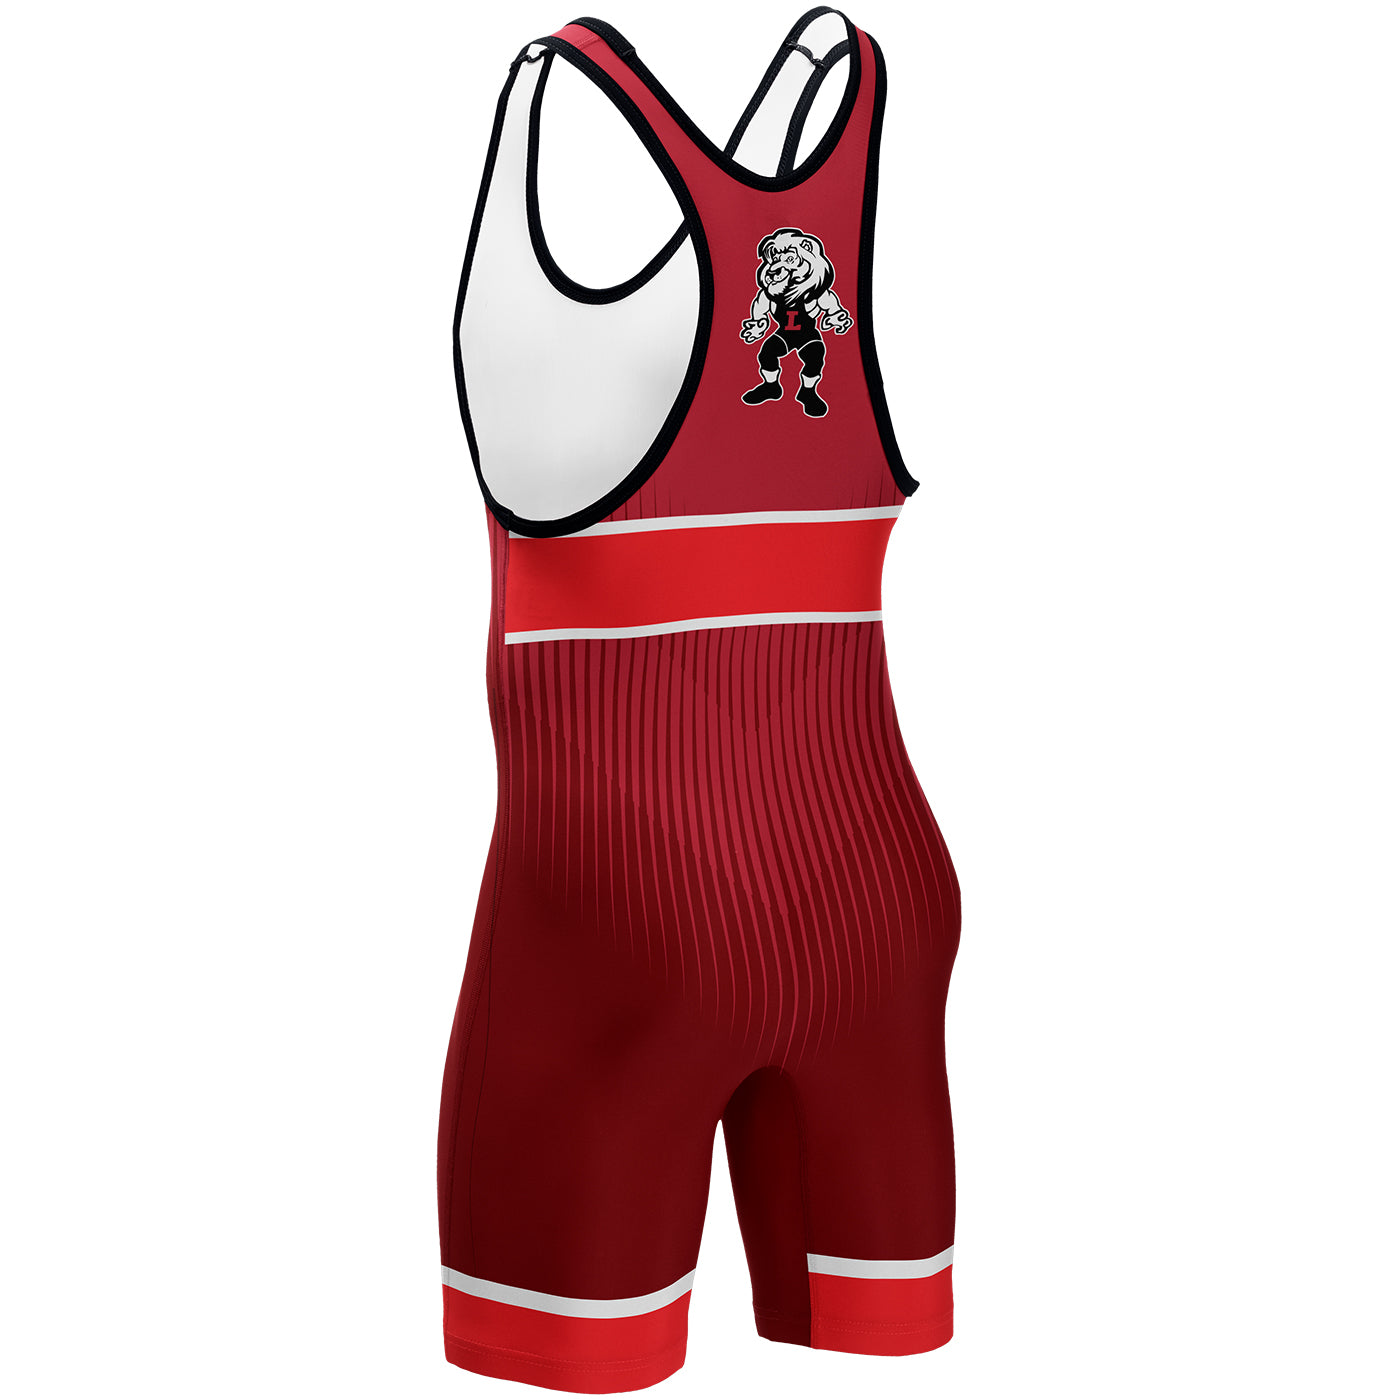 Cliff Keen Sublimated Singlet S794364